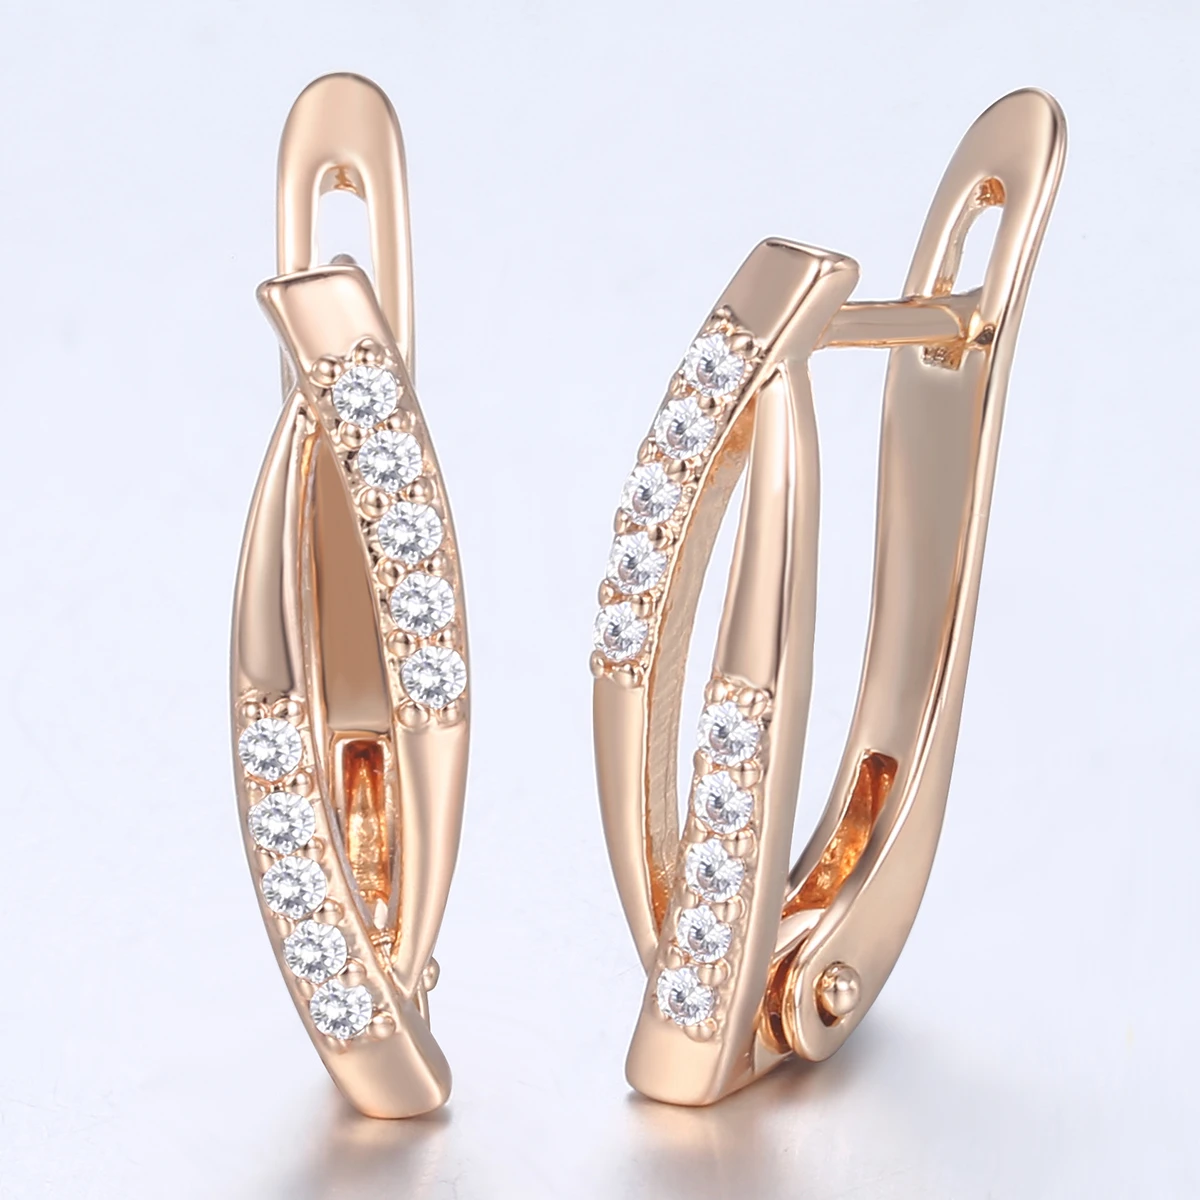 Womens Stud Earrings Elongated Oval CZ Stone 585 Rose Gold Earrings For Women Fashion Trend Jewelry Gift Dropshipping KGE179